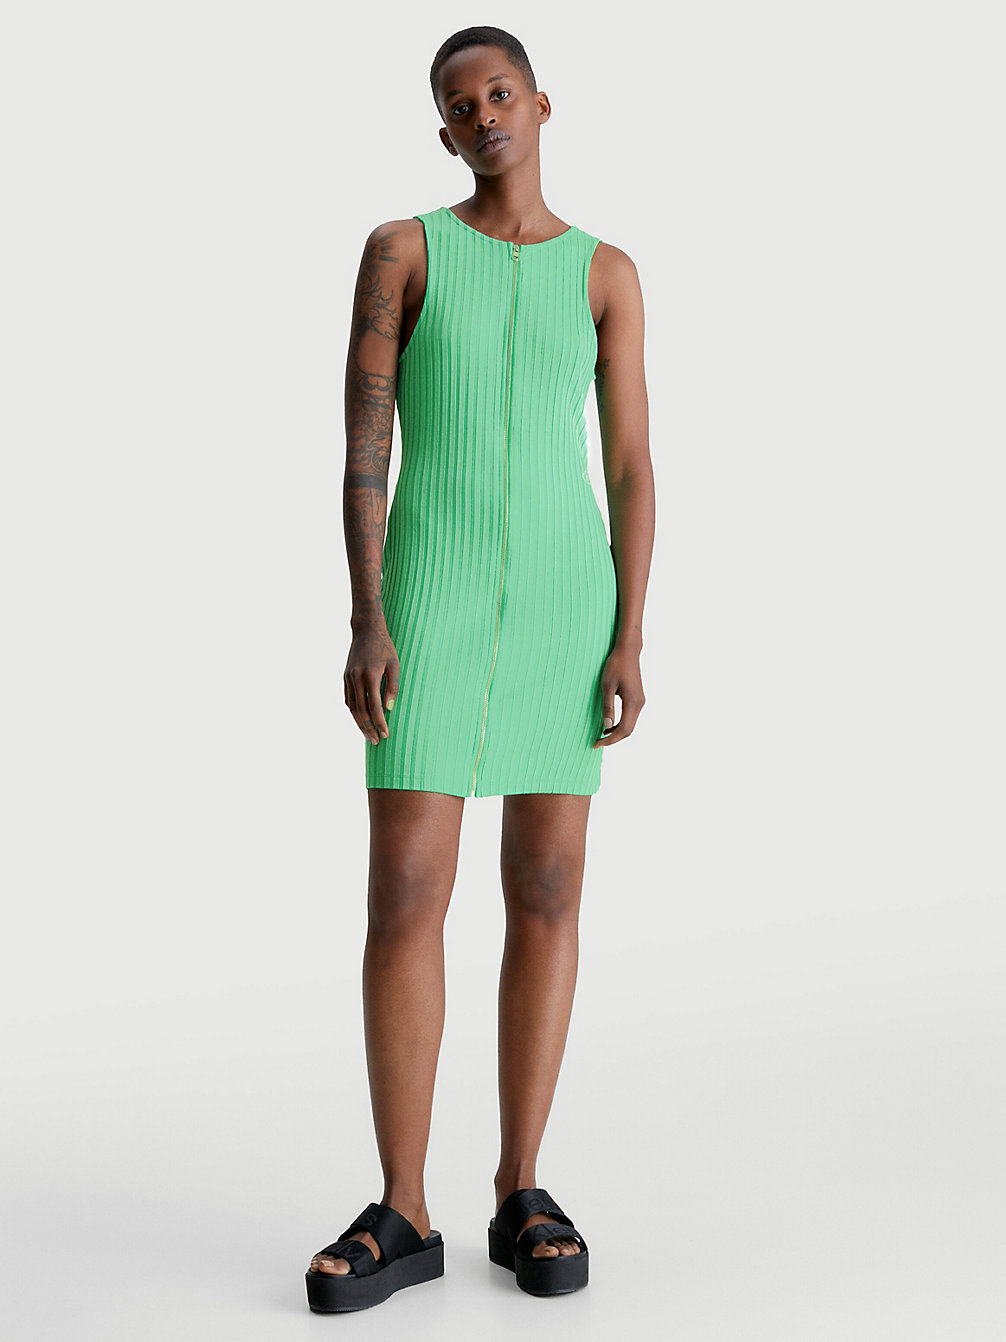 Initiative Traditional commonplace Women's Dresses for All Occasions | Calvin Klein®